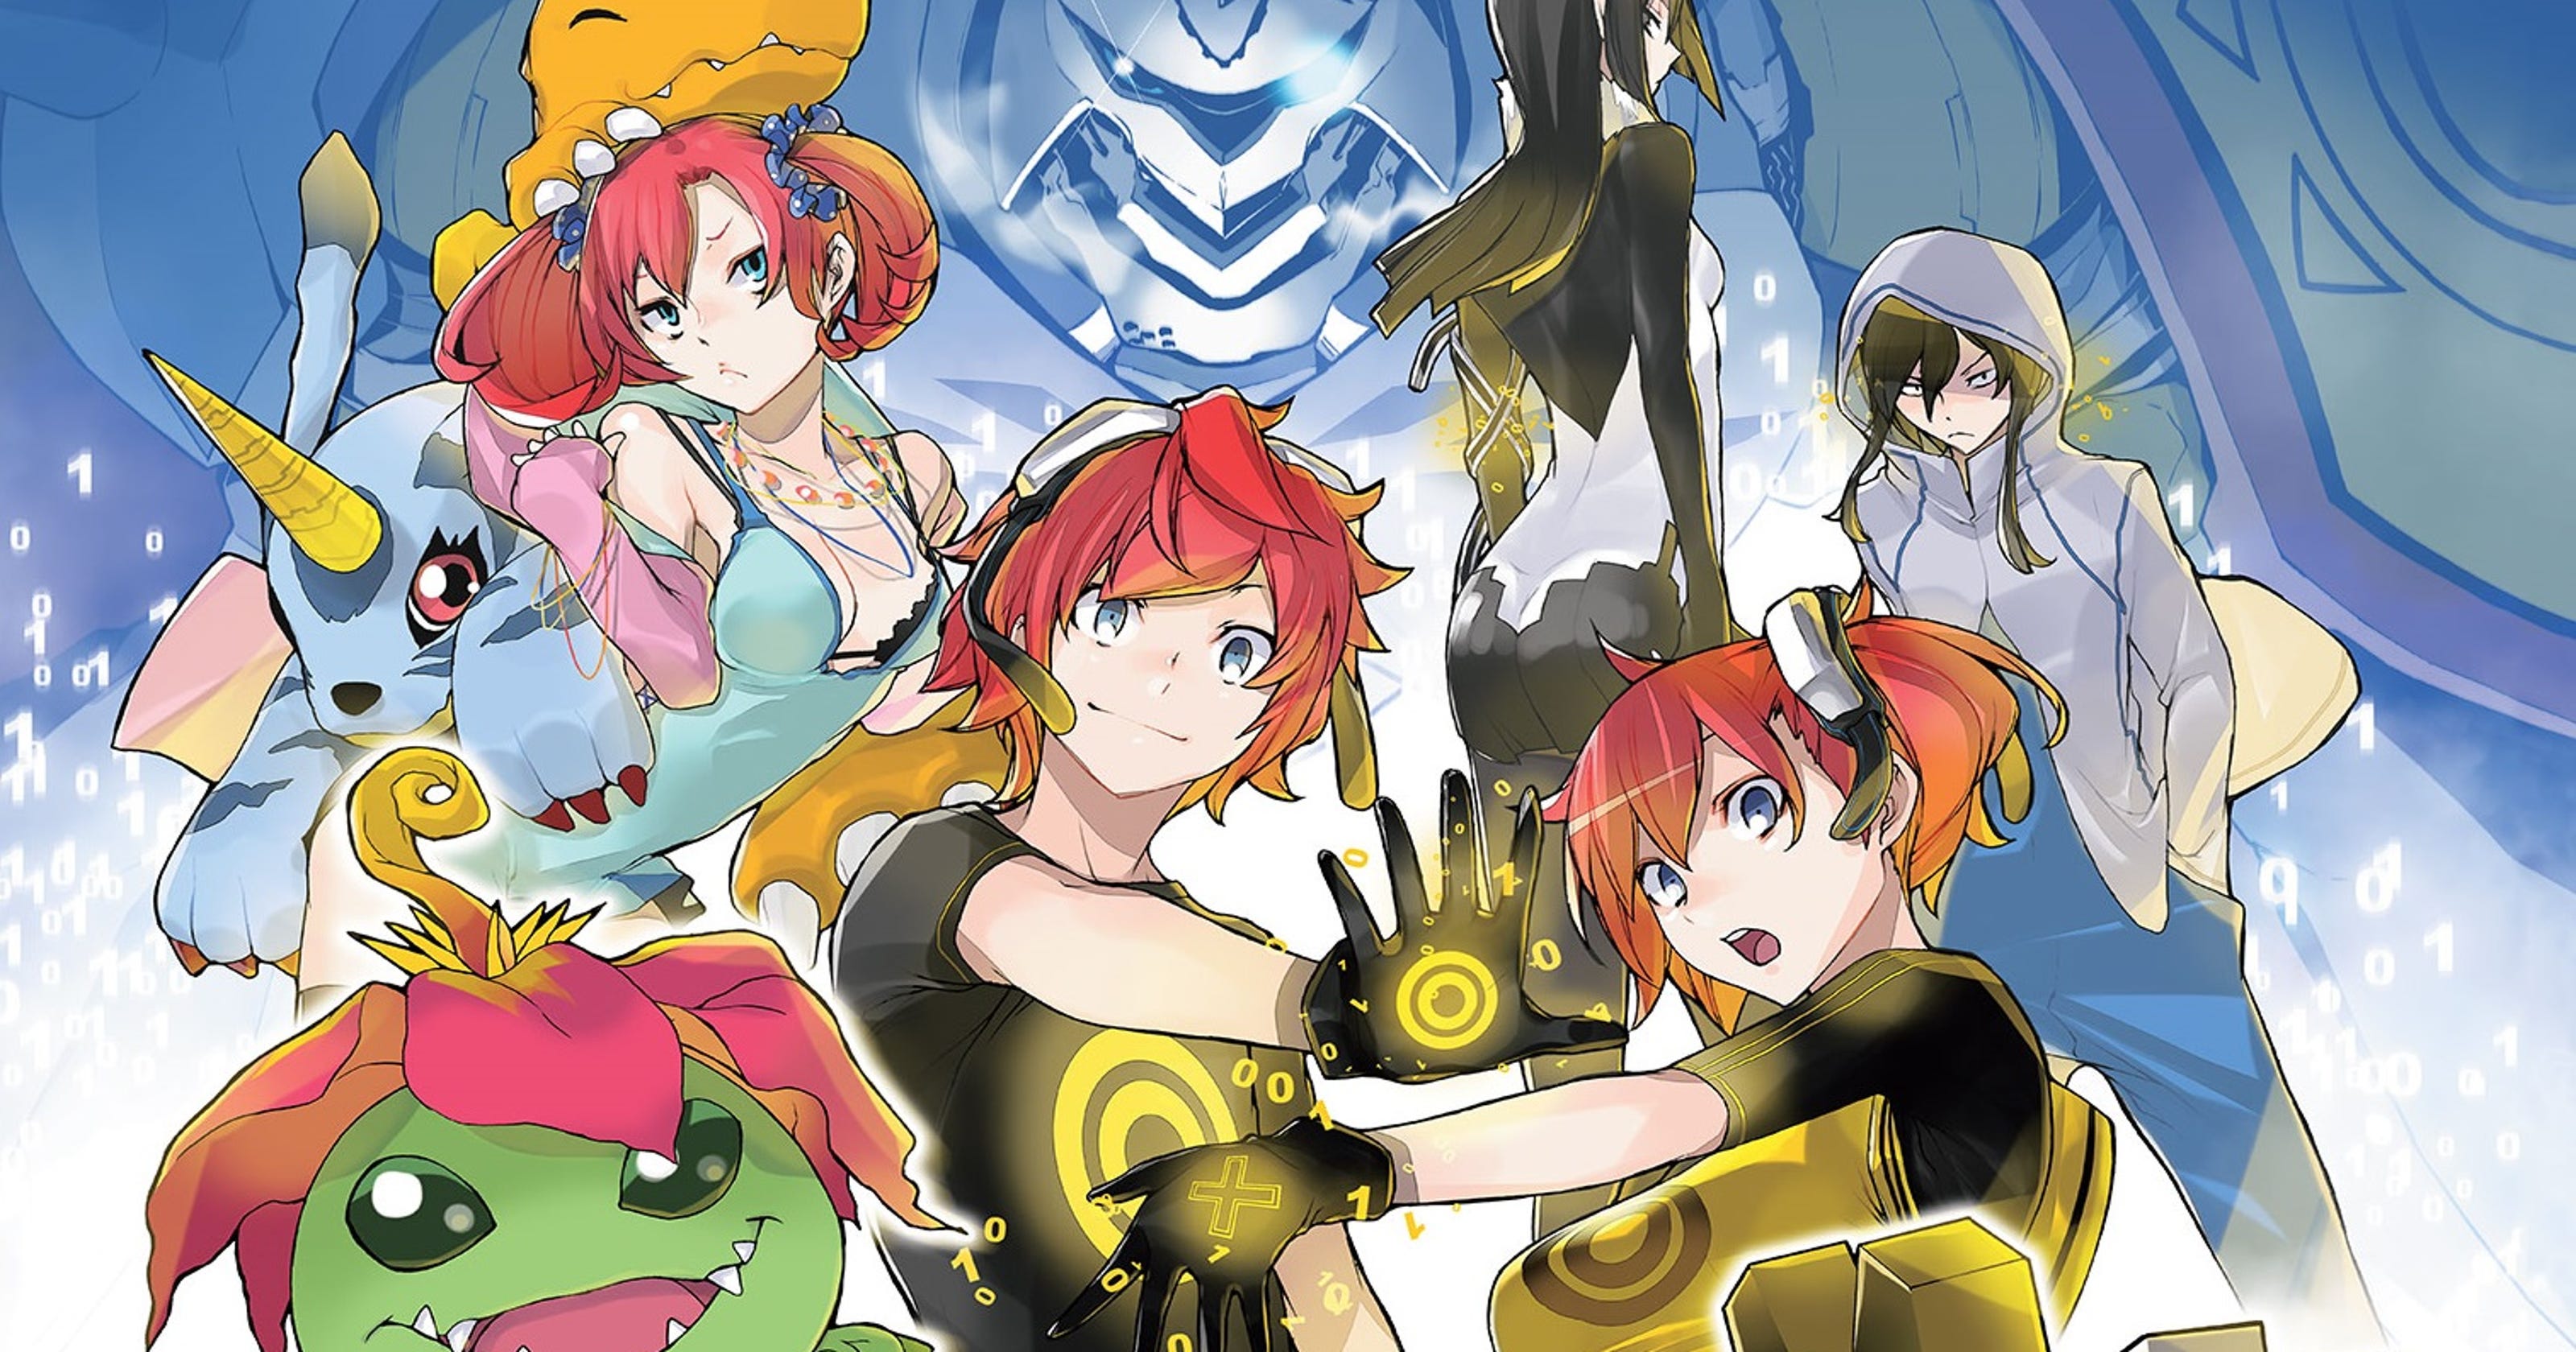 Digital Divide Digimon Story Cyber Sleuth Review Technobubble